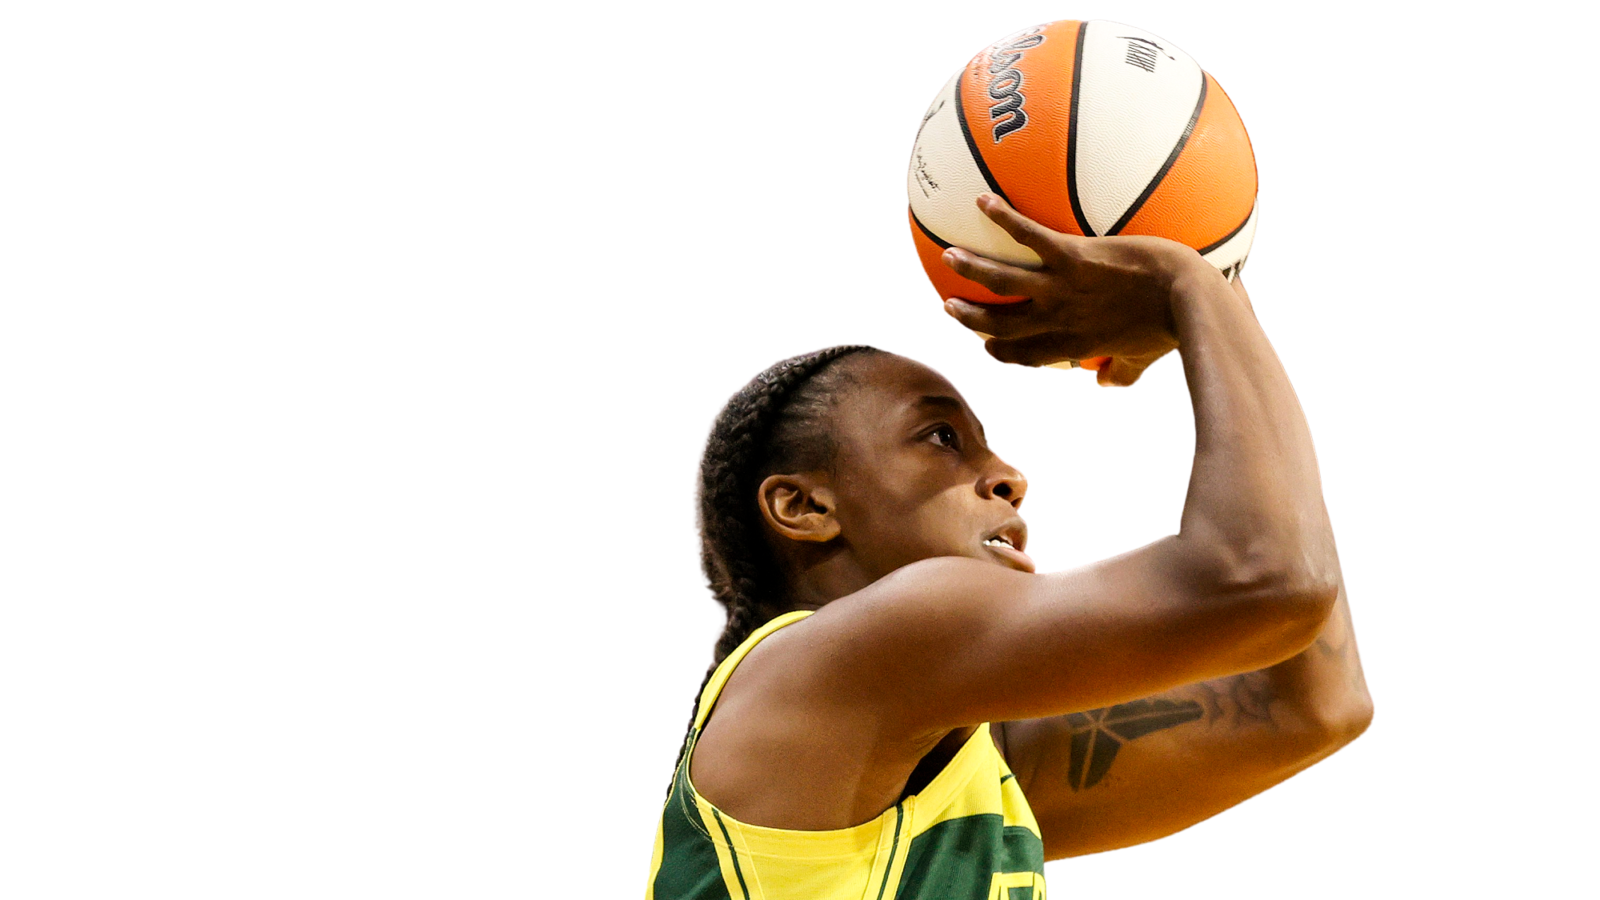 WNBA basketball player, Jewell Loyd is mid-jump with a basketball in her hands. She is portrayed in front of a white background.